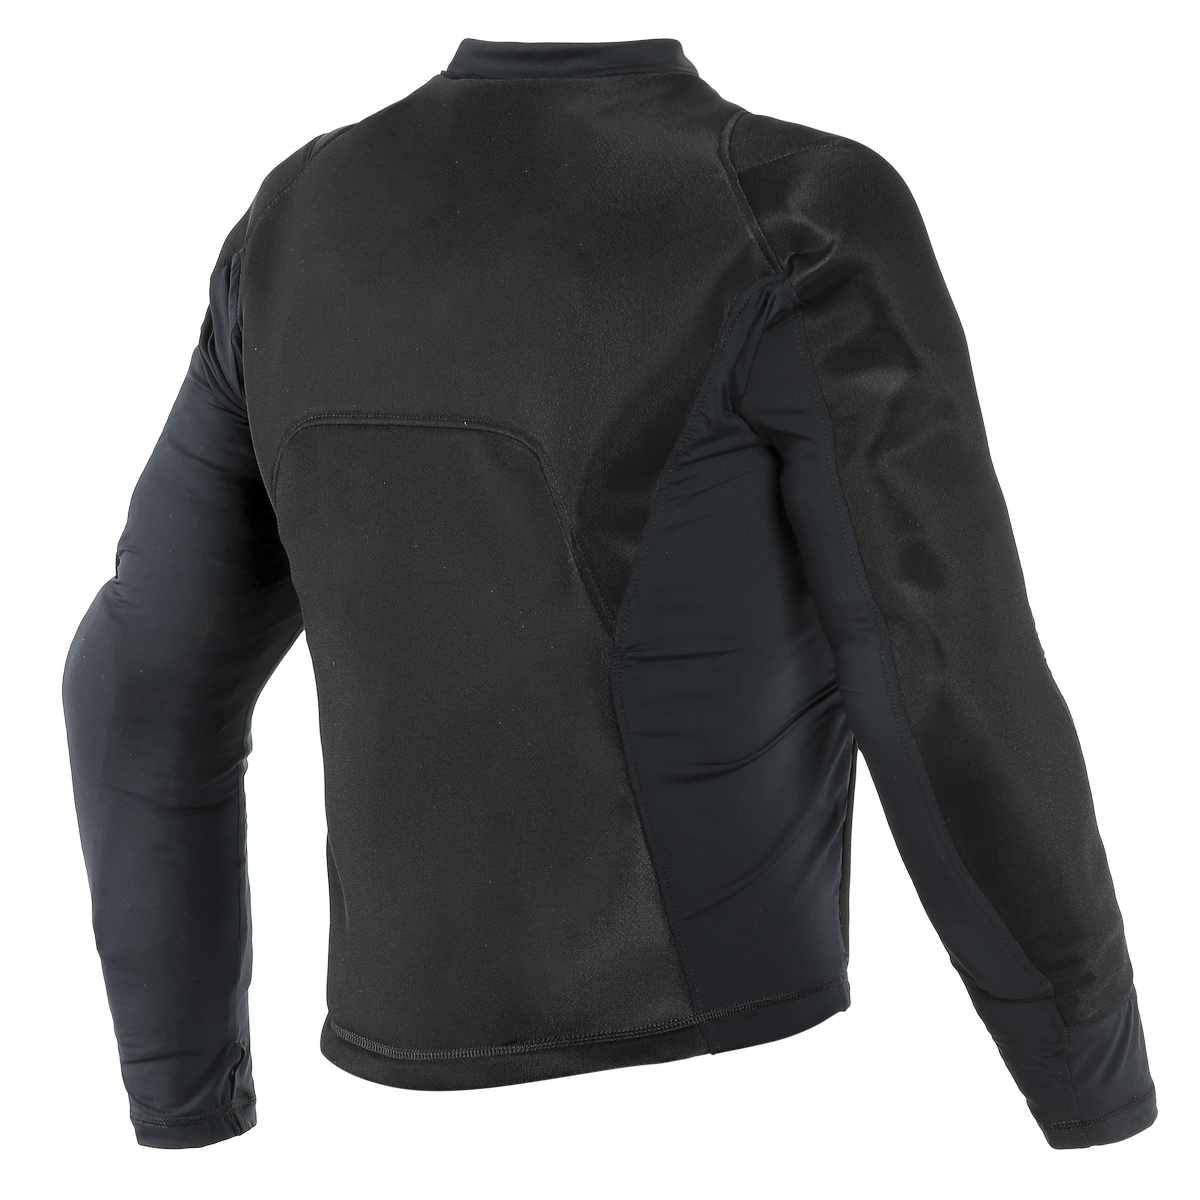 gilet de protection dainese pro-armor safety jacket 2 b